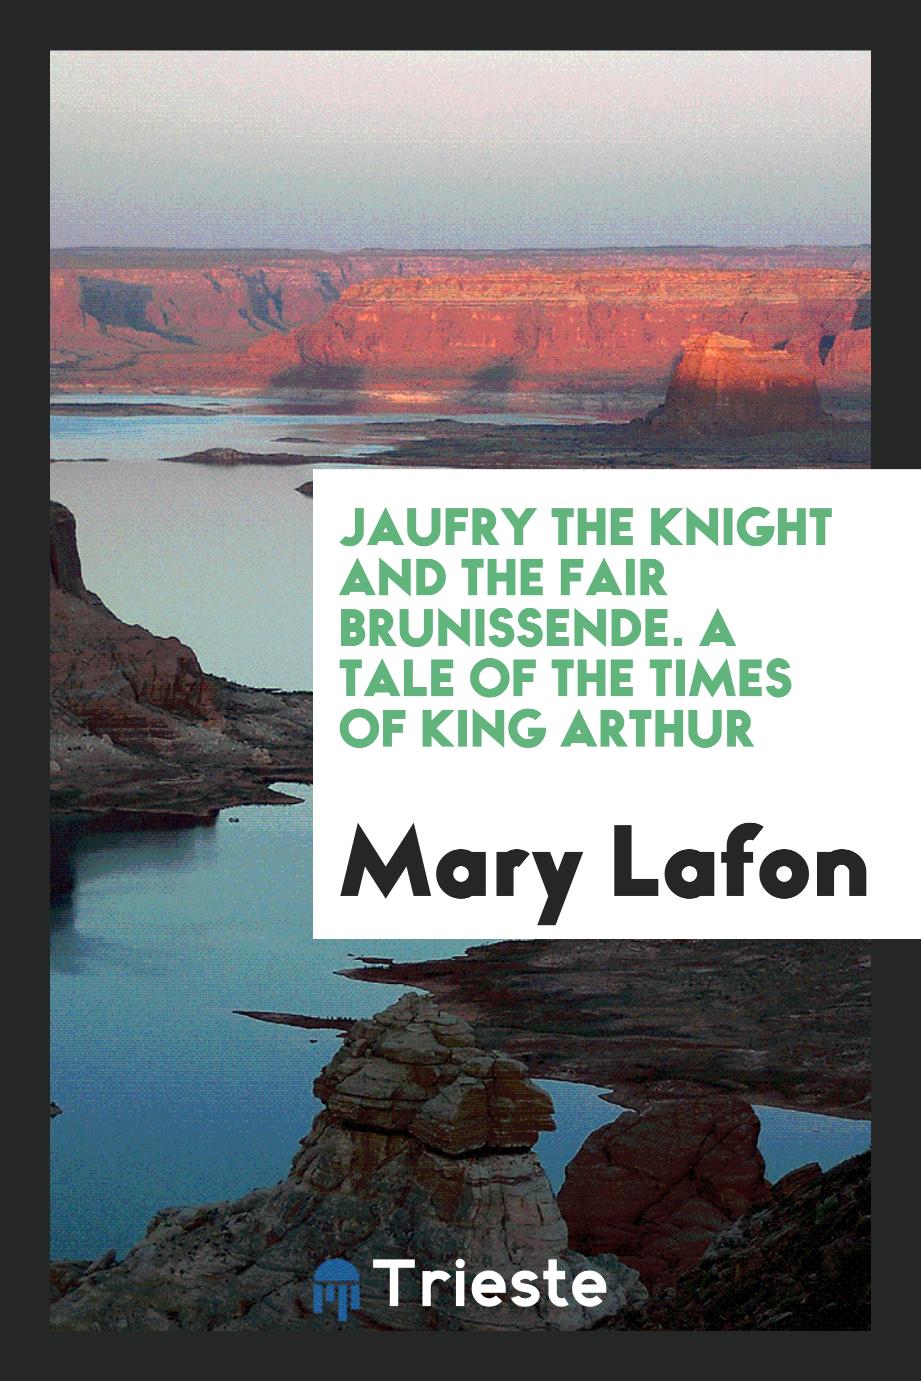 Jaufry the Knight and the Fair Brunissende. A Tale of the Times of King Arthur